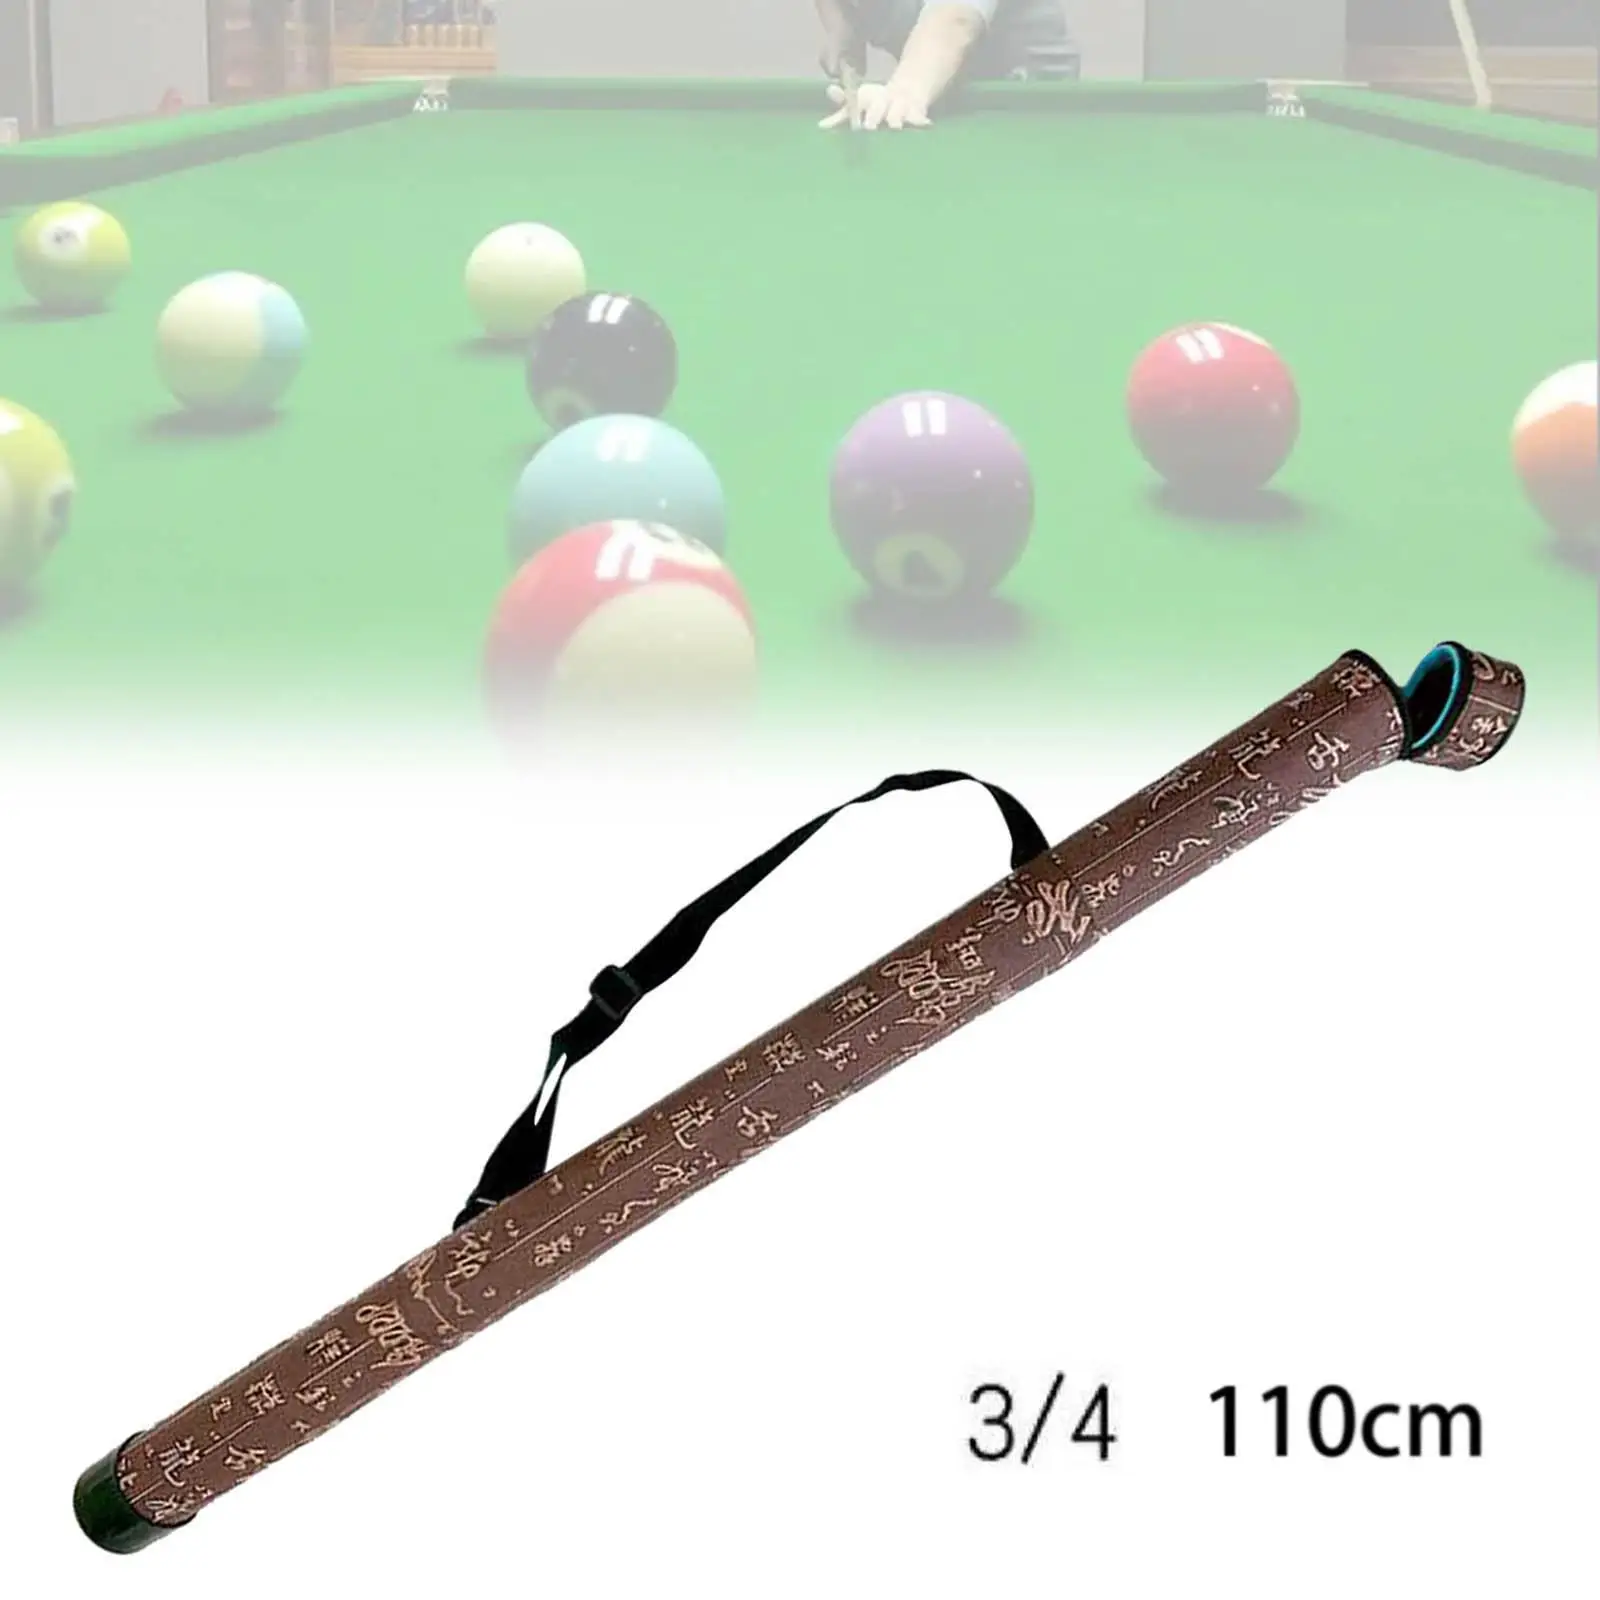 Billiards Pool Cue Case Snooker Club Pouch Holder with Accessory Pouch